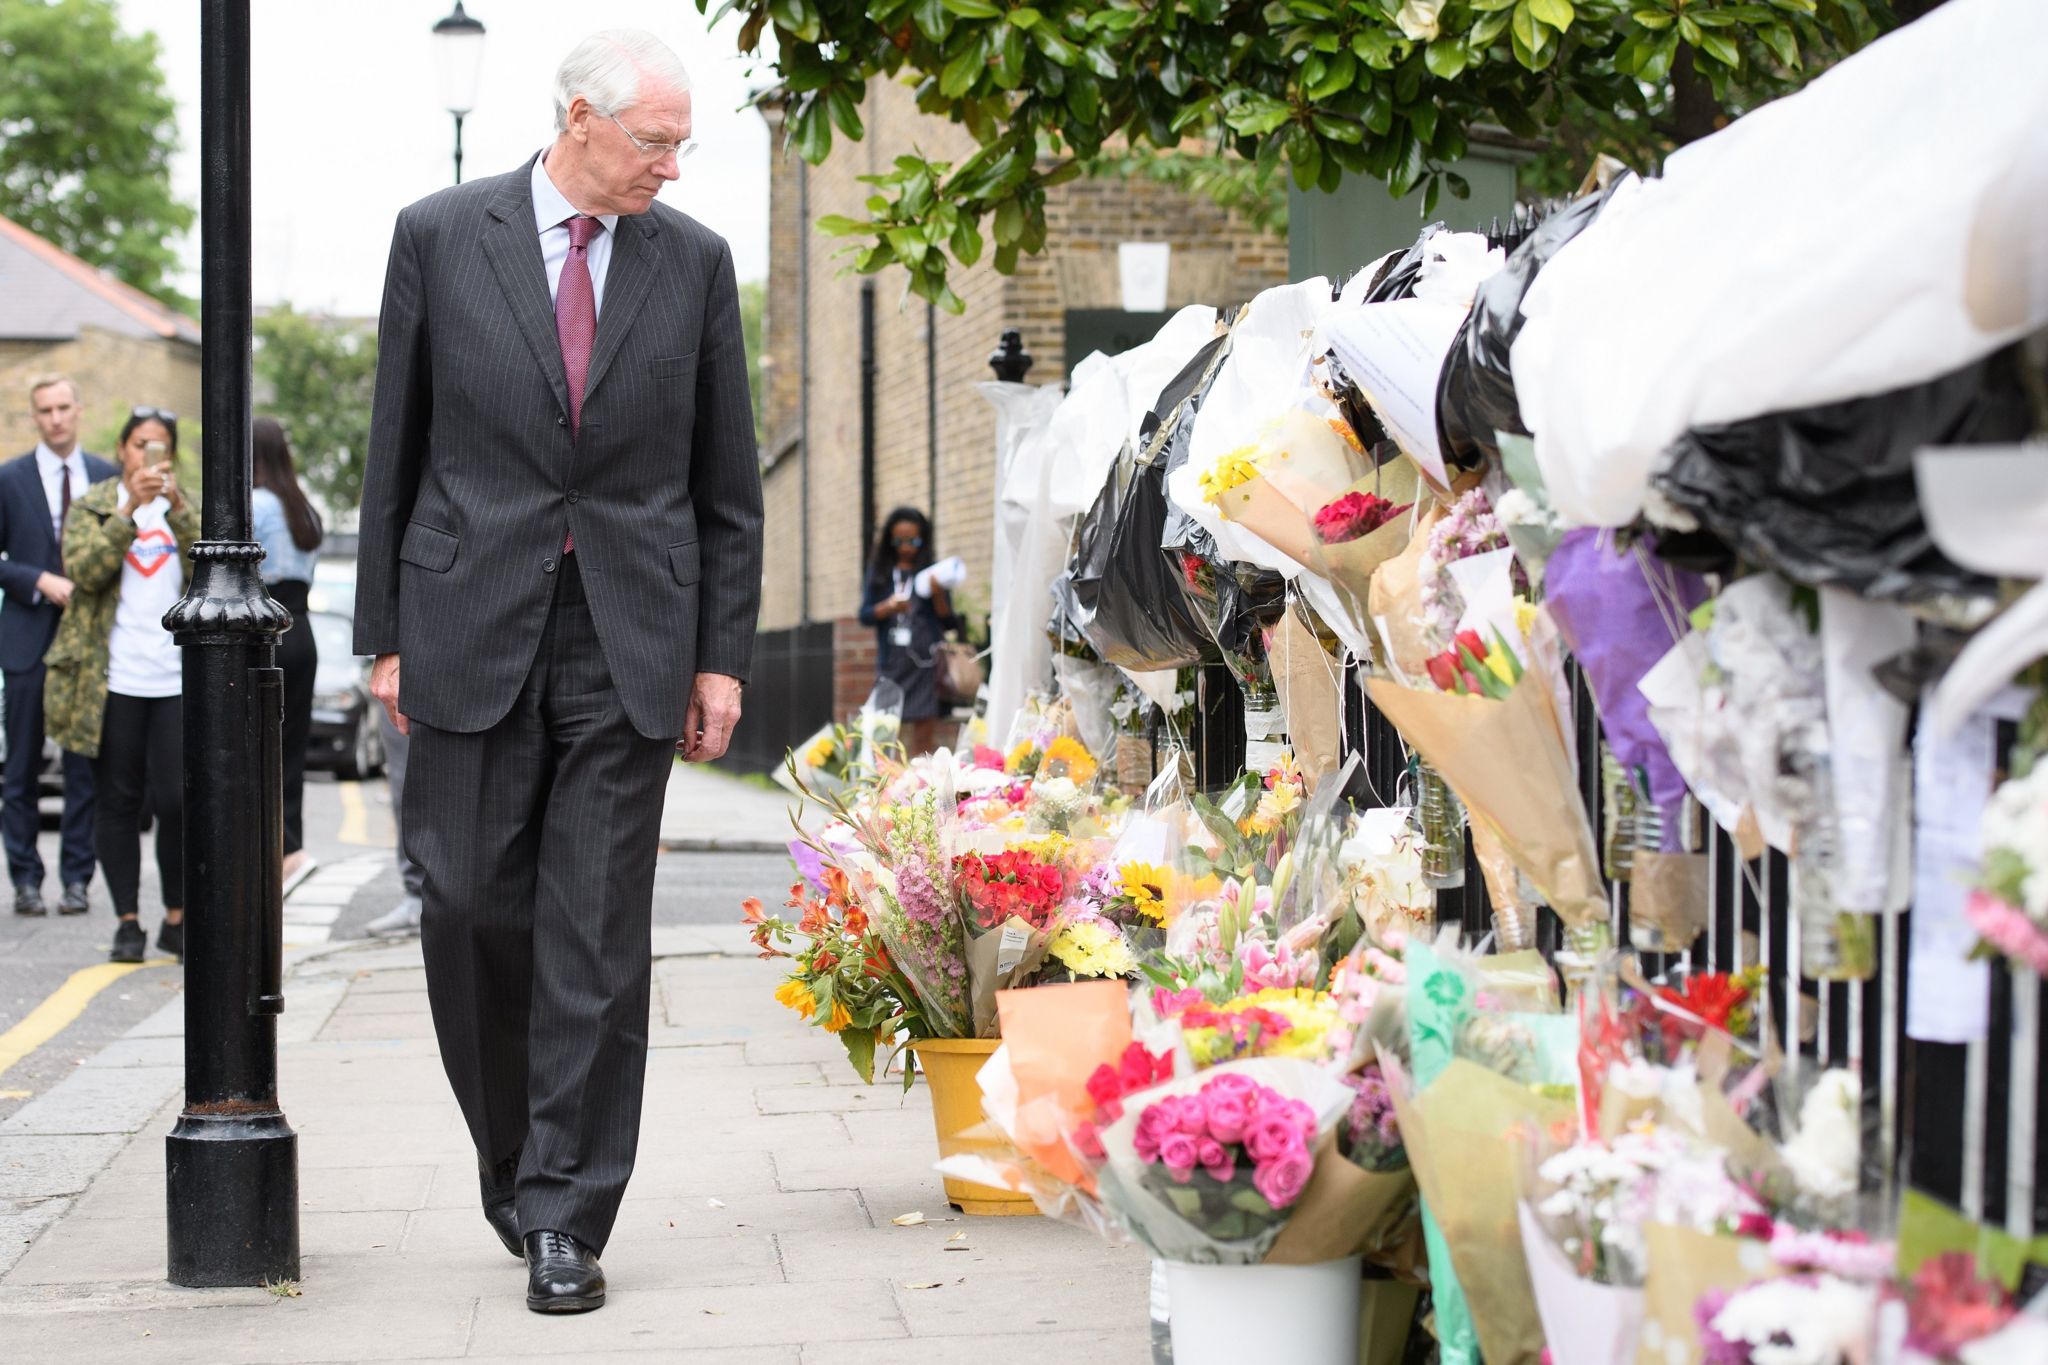 Sir Martin Moore-Bick looks at flowers at a Grenfell tribute